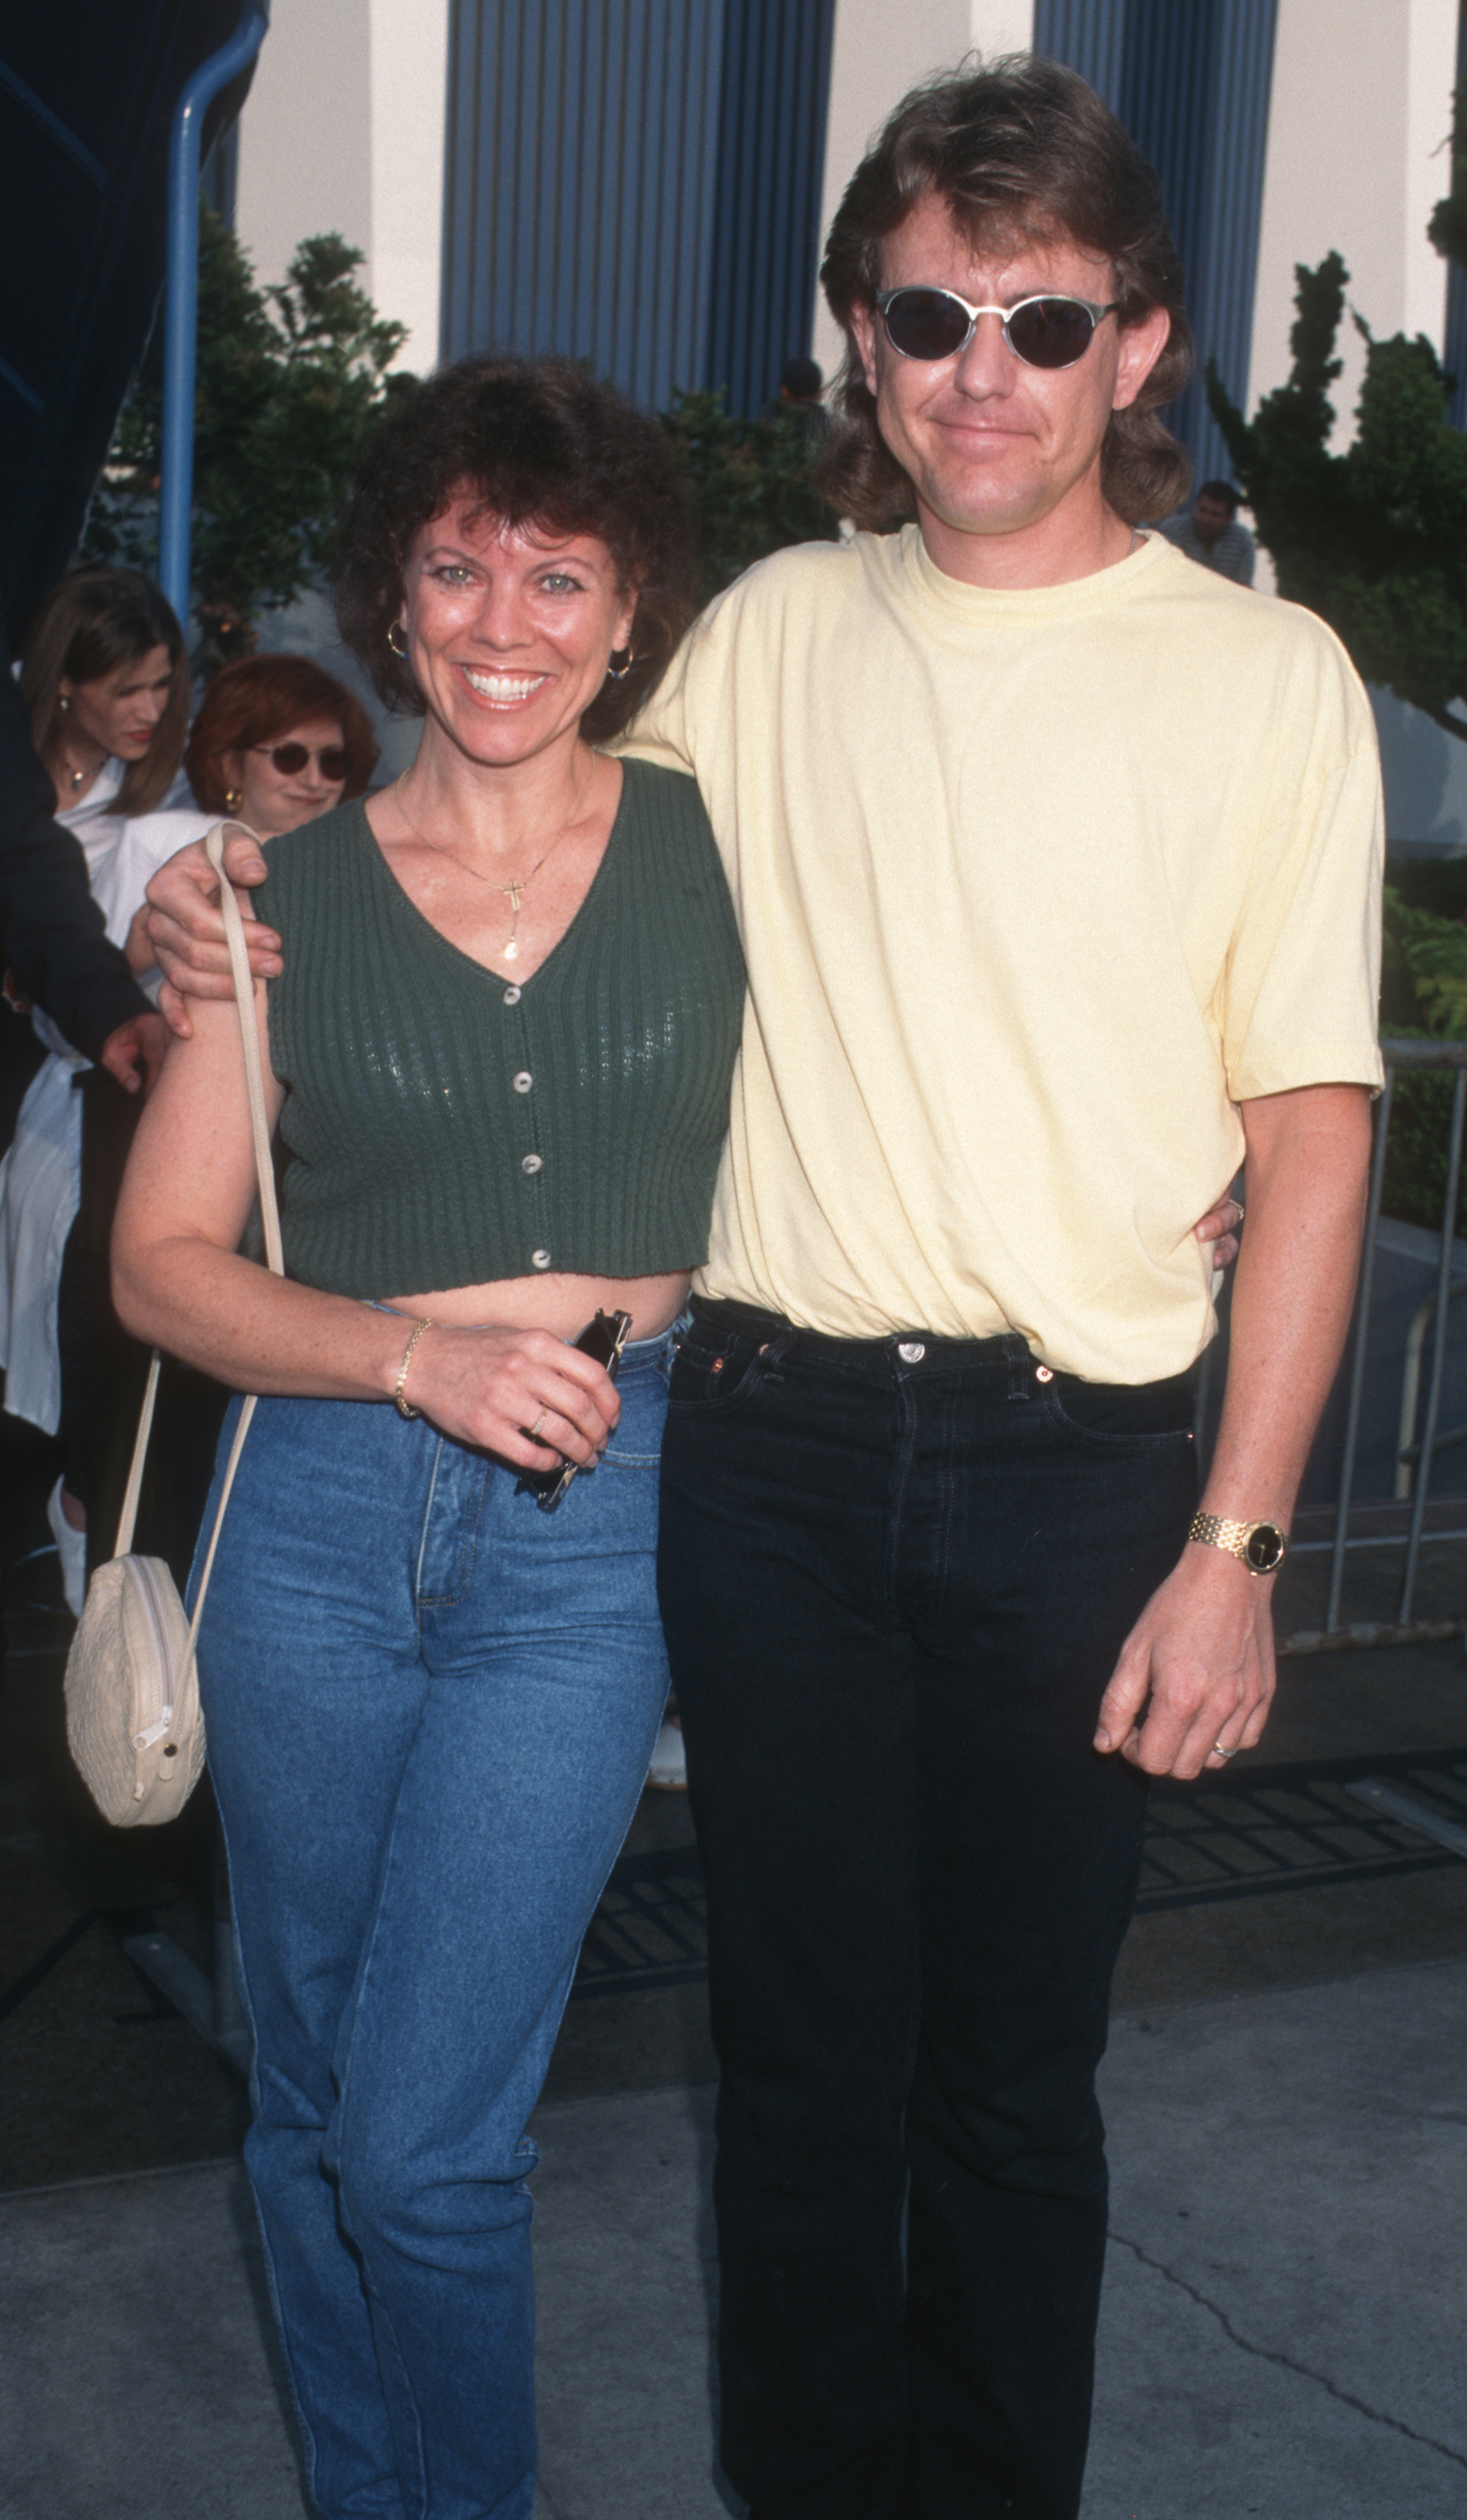 Erin Moran and Steve Fleischman at the Ringling Brothers Circus Variety Club Children's Benefit on August 7, 1997 | Source: Getty Images